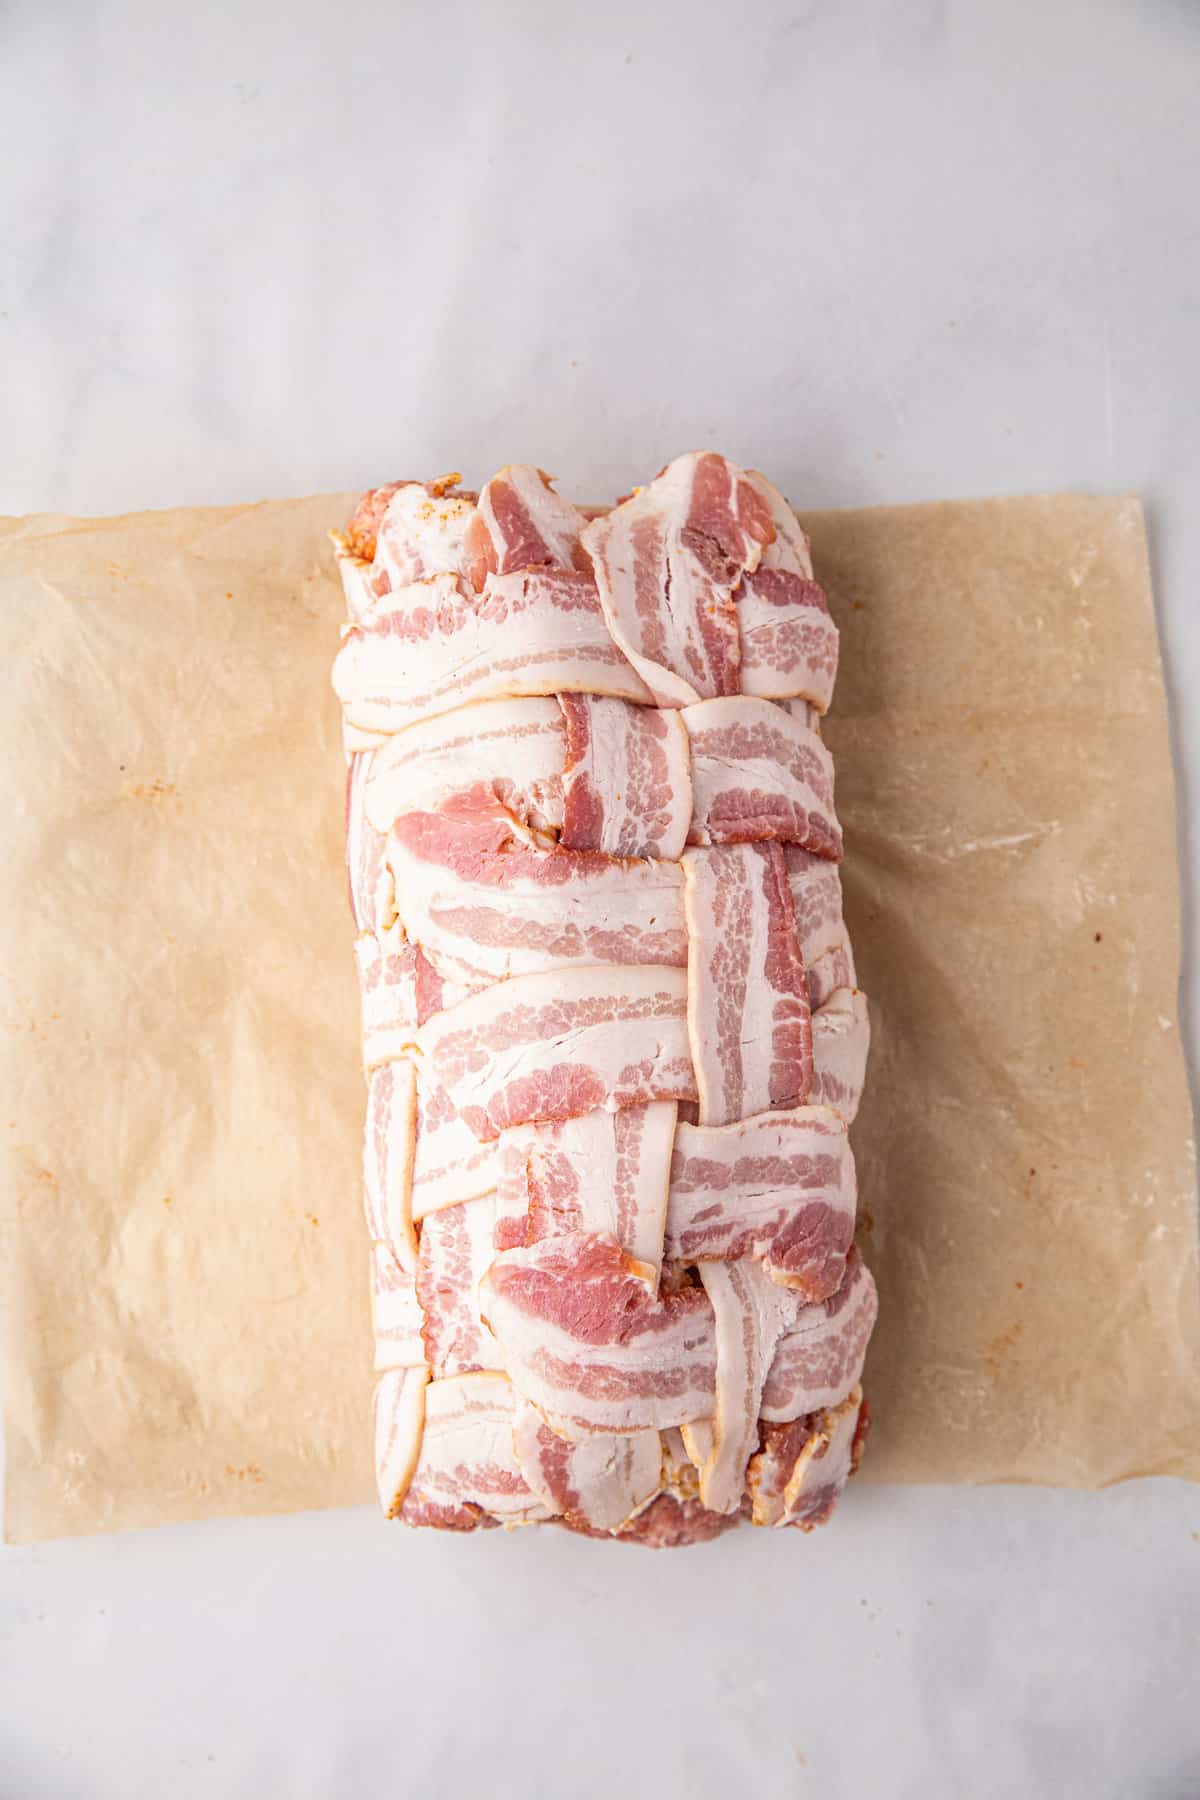 Rolling bacon weave and it's ingredients for Bacon Explosion recipe